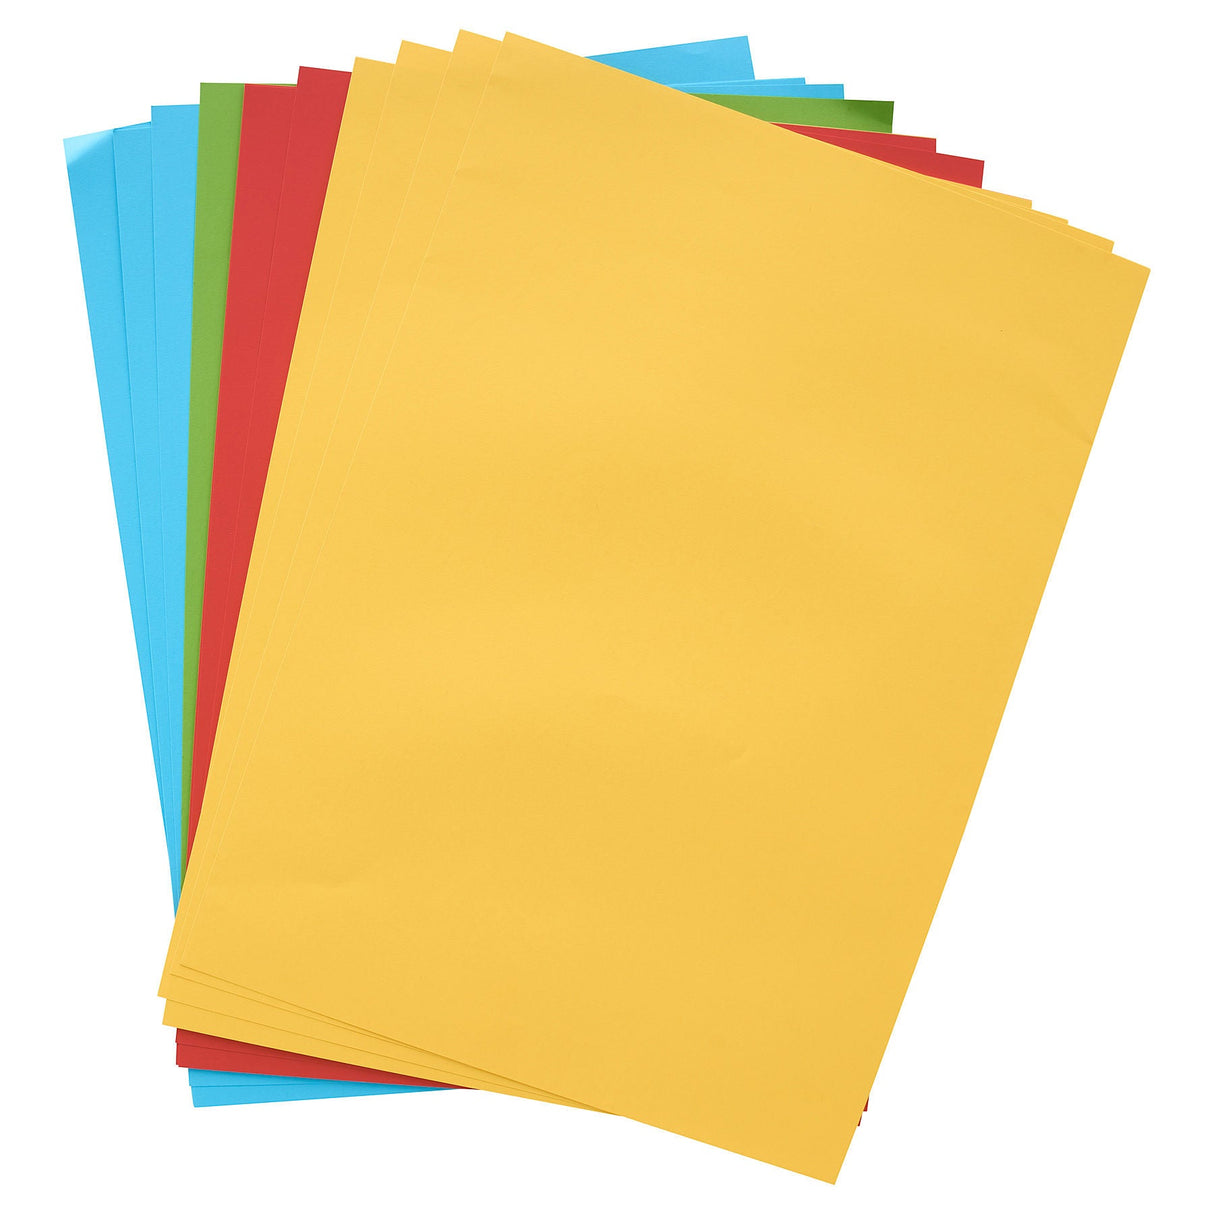 Premier Activity A2 Card - 160gsm - Rainbow - 25 Sheets | Stationery Shop UK